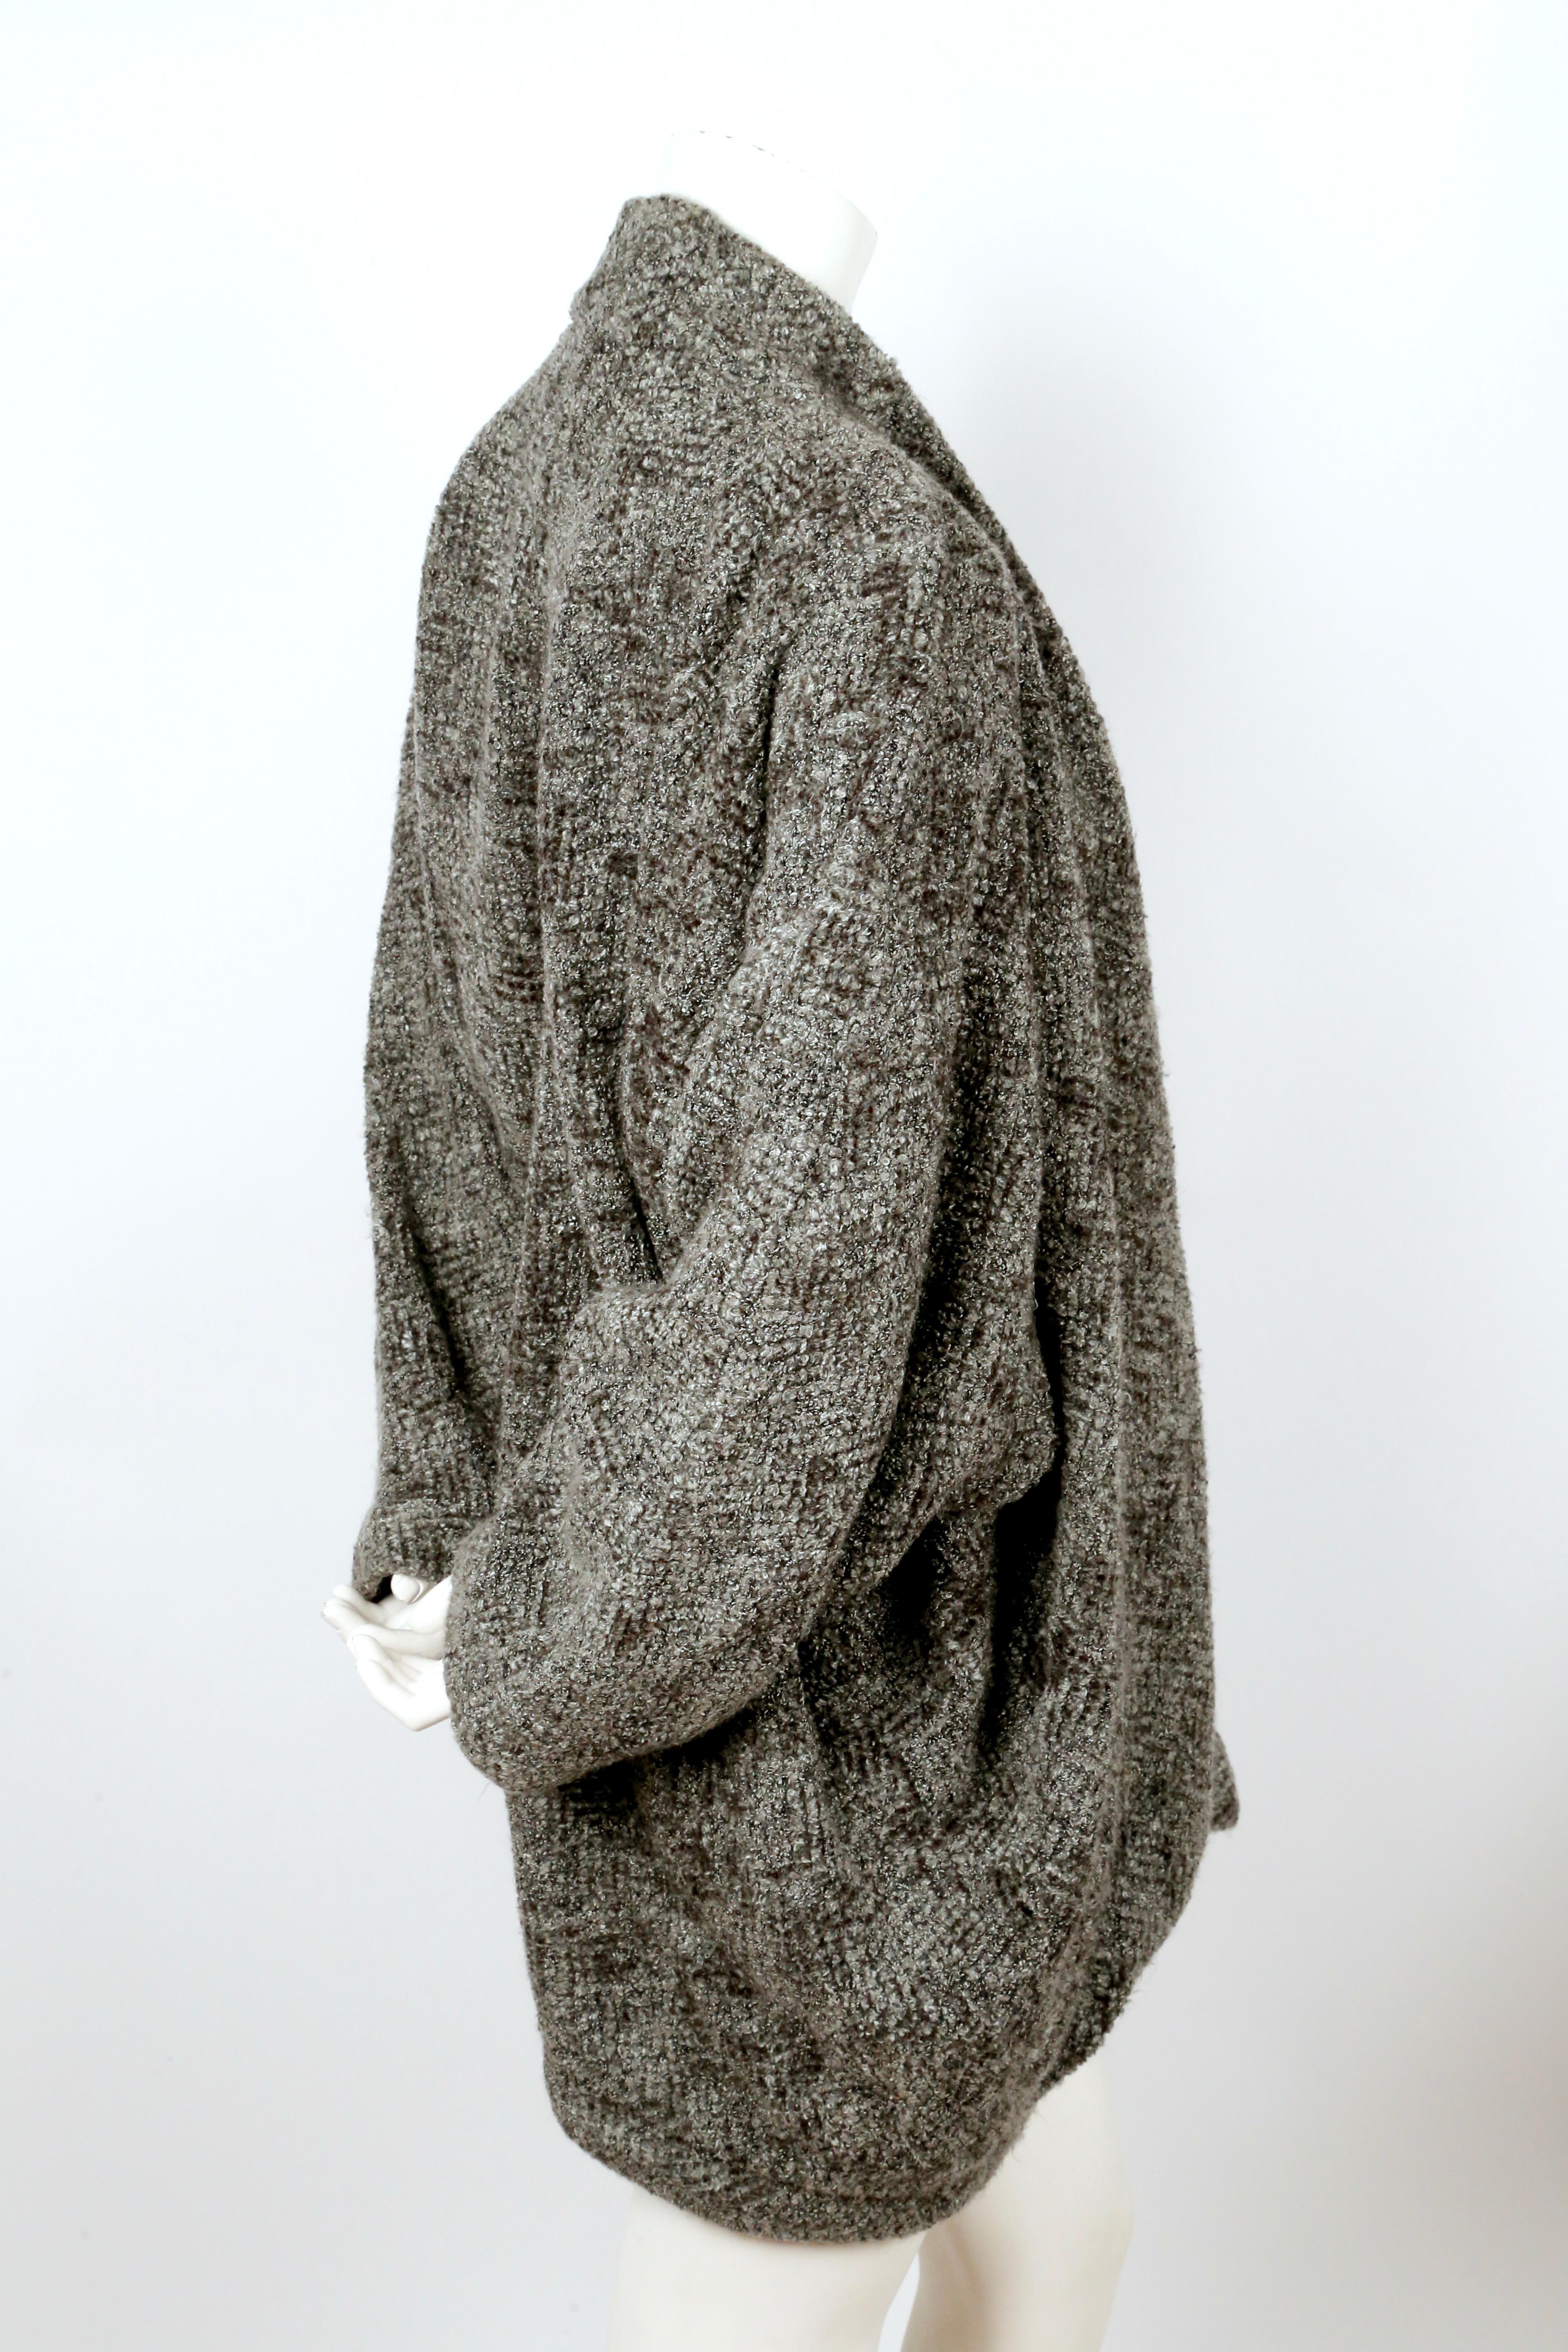 Grey boucle knit, cocoon style sweater coat designed by Issey Miyake dating to the 1980's. No size is indicated however this will fit many sizes to to the oversized cut. Unlined. Pockets at hips. Good condition. 